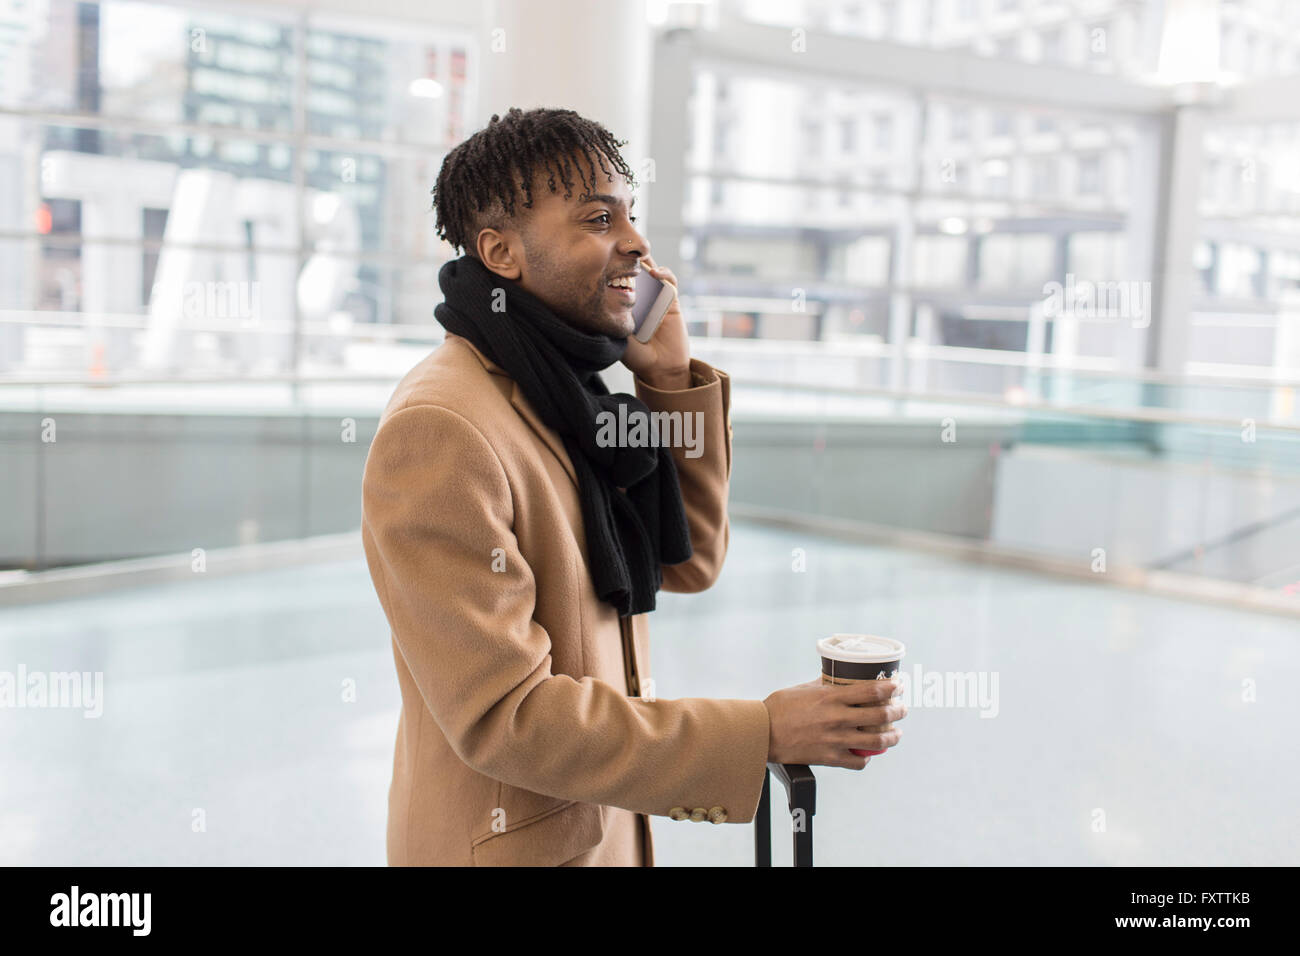 Young businessman talking on smartphone in train station atrium Stock Photo